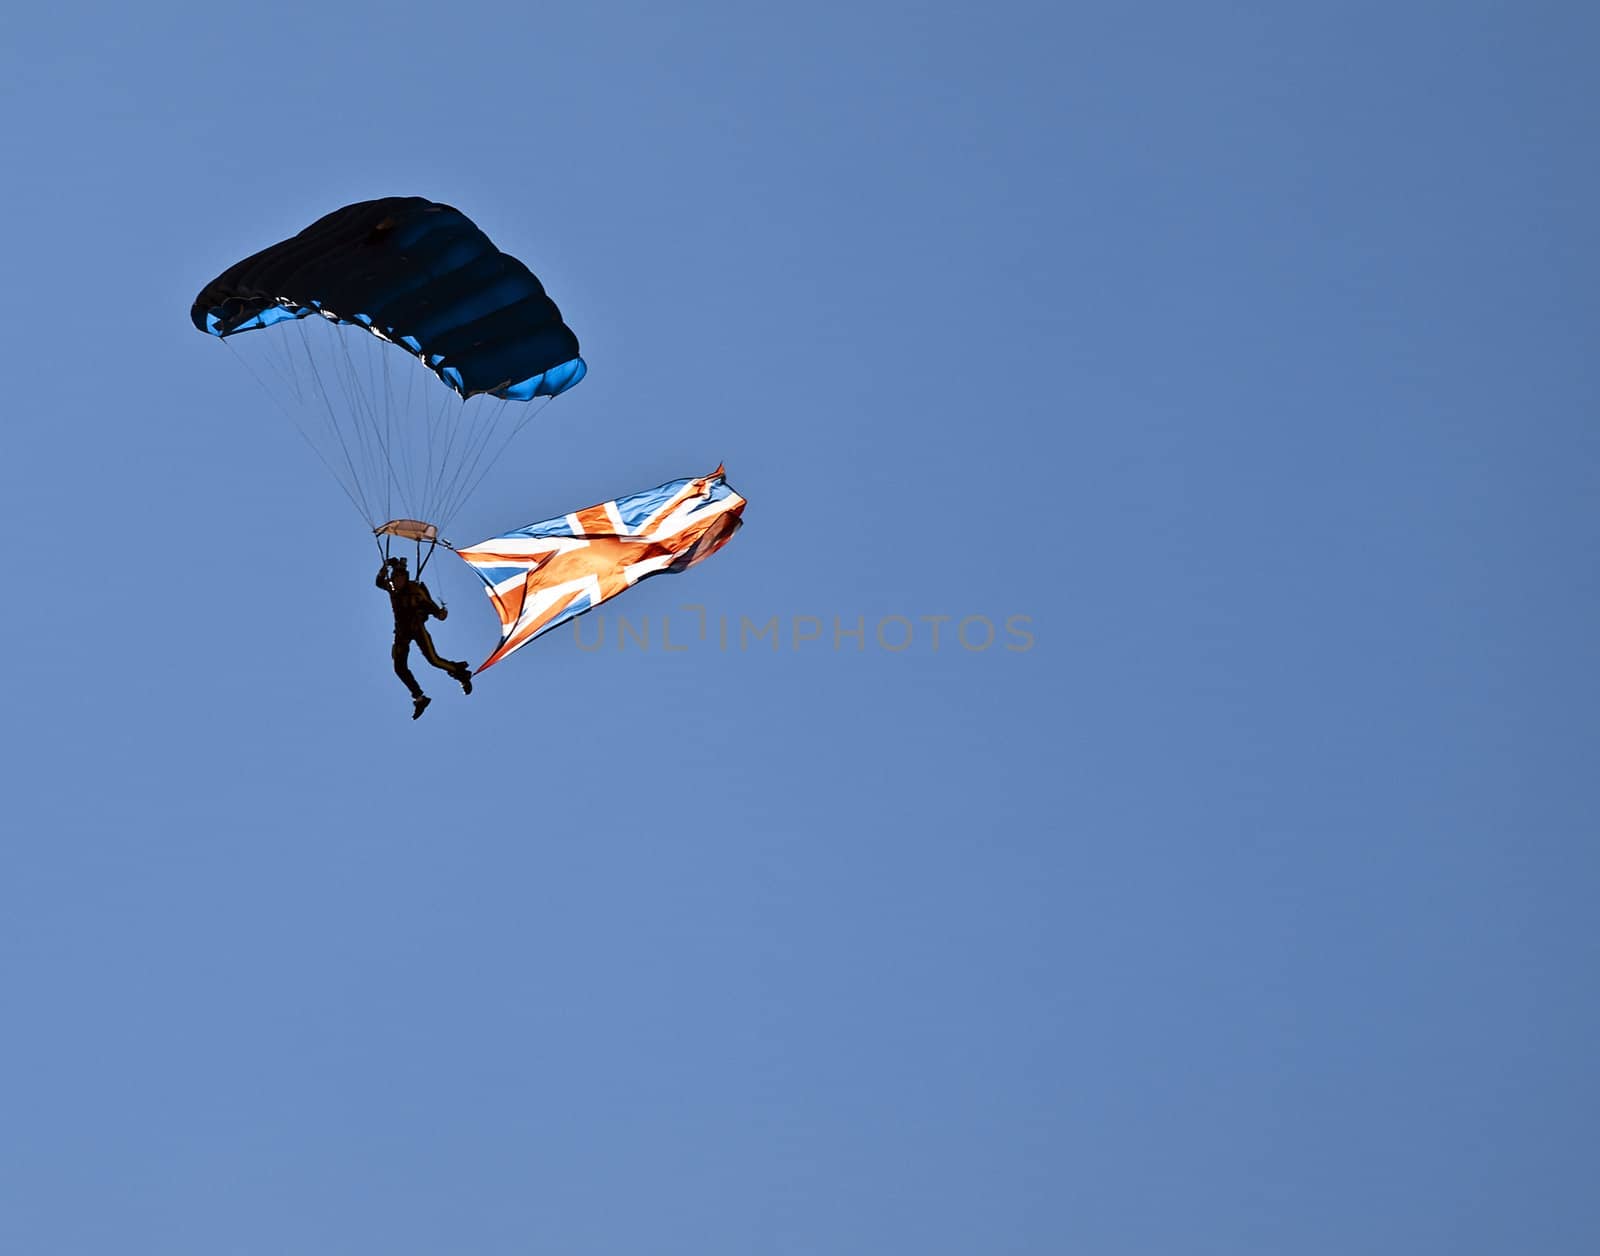 Tigers FreeFall Parachute Team by PhotoWorks